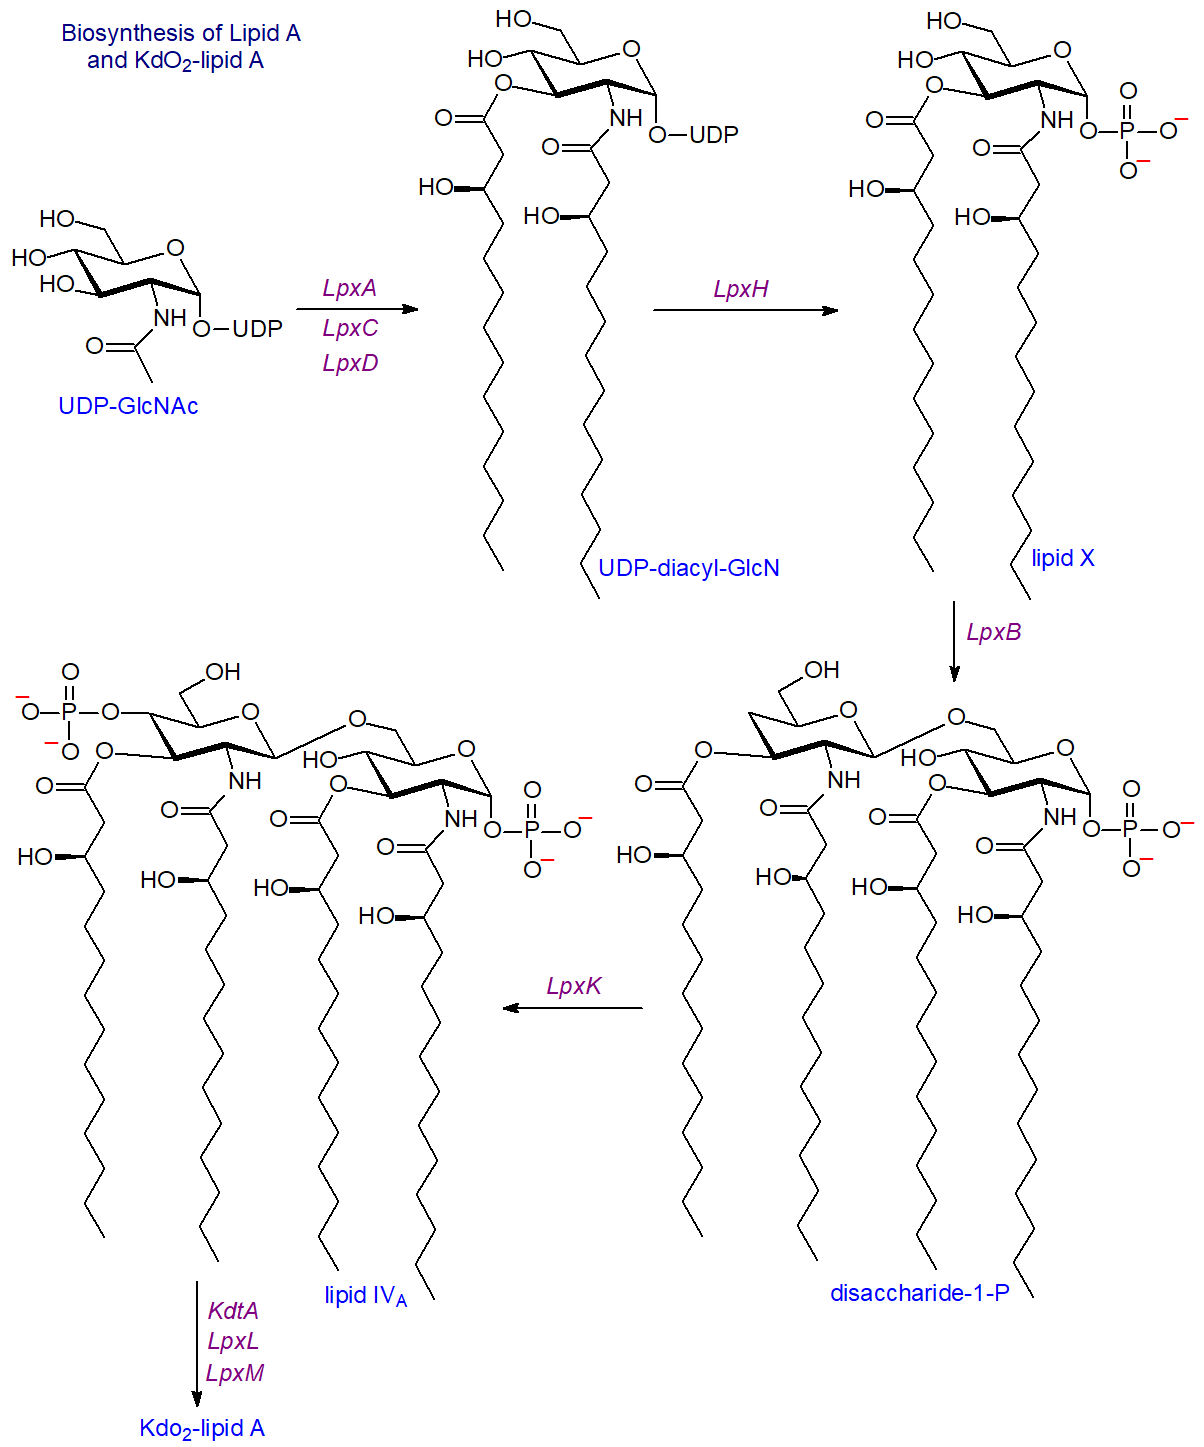 Biosynthesis of Lipid A